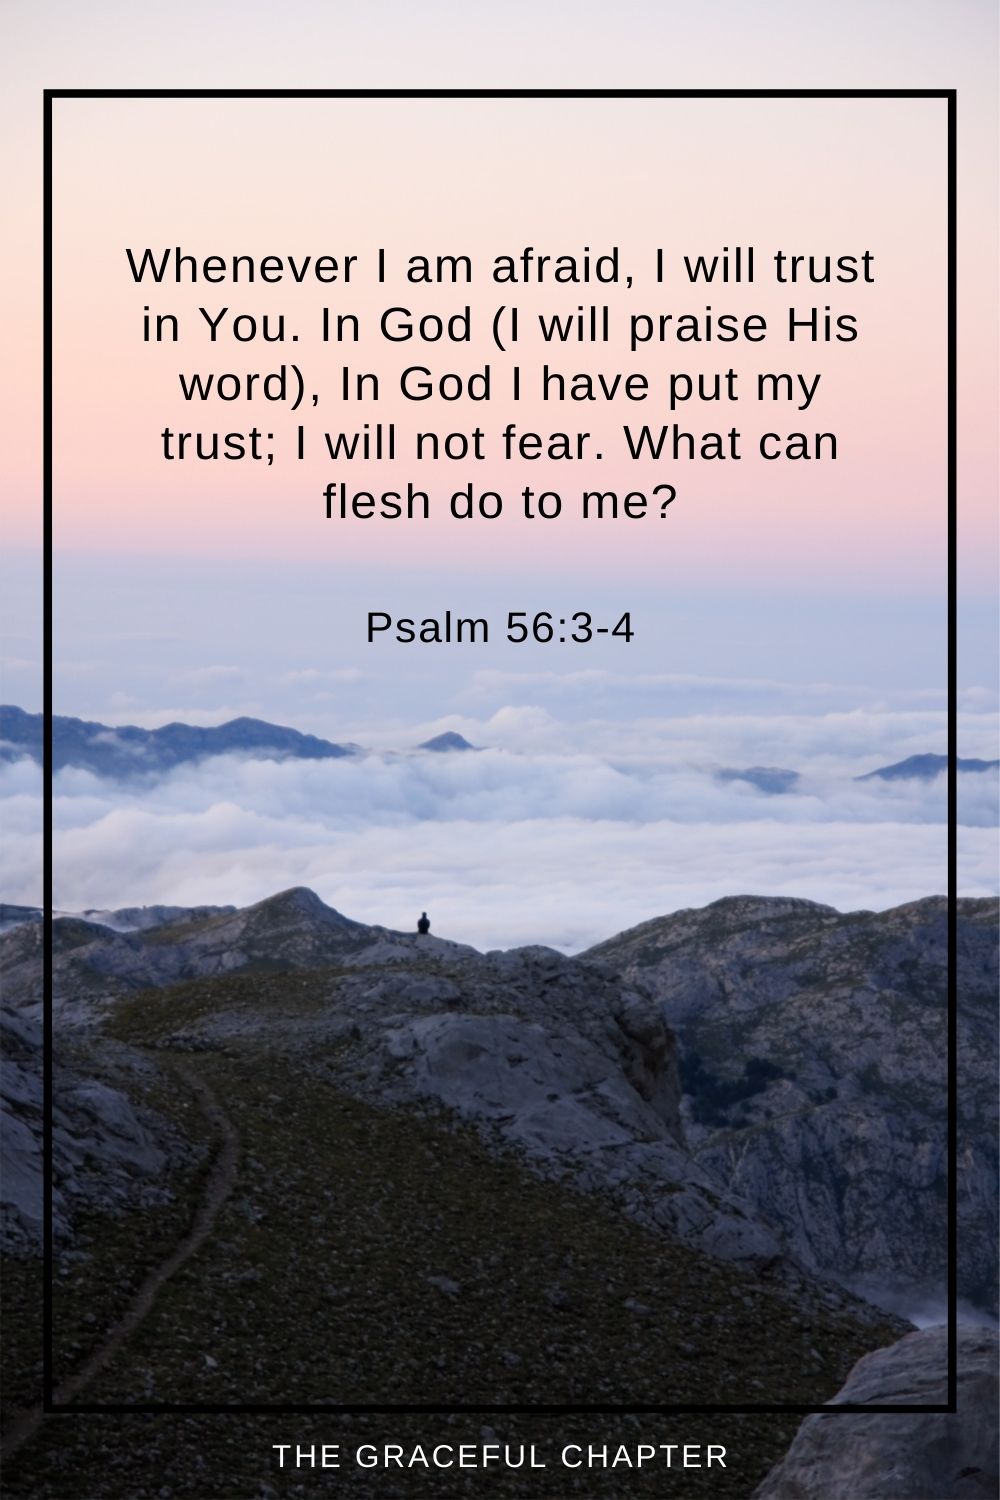 Whenever I am afraid, I will trust in You. In God (I will praise His word), In God I have put my trust; I will not fear. What can flesh do to me? Psalm 56:3-4